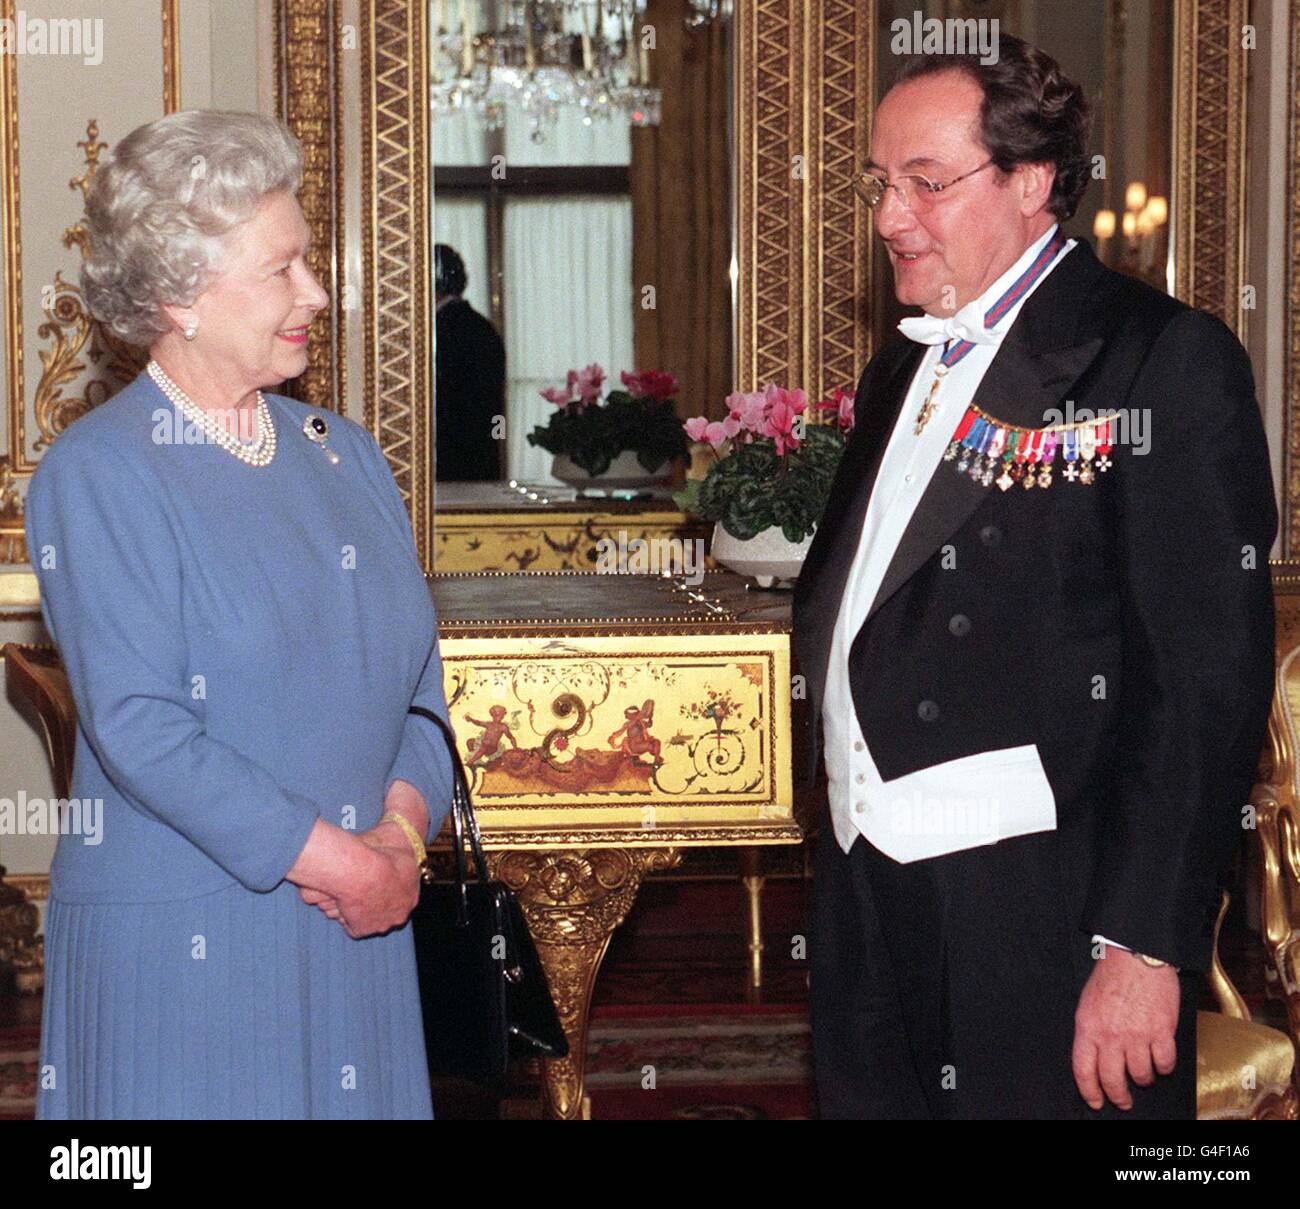 The Queen receives His Excellency the Ambassador of France, M Daniel Bernard CMG CBE, who presented his Letter of Credence at Buckingham Palace. * 19/12/2001: M Bernard has refused to apologise over a discussion in which he was reported to describe Israel as a 'shitty little country'. M Bernard was reported to have made the remark at a buffet party, allegedly blaming Israel for contributing to the international security crisis. Stock Photo